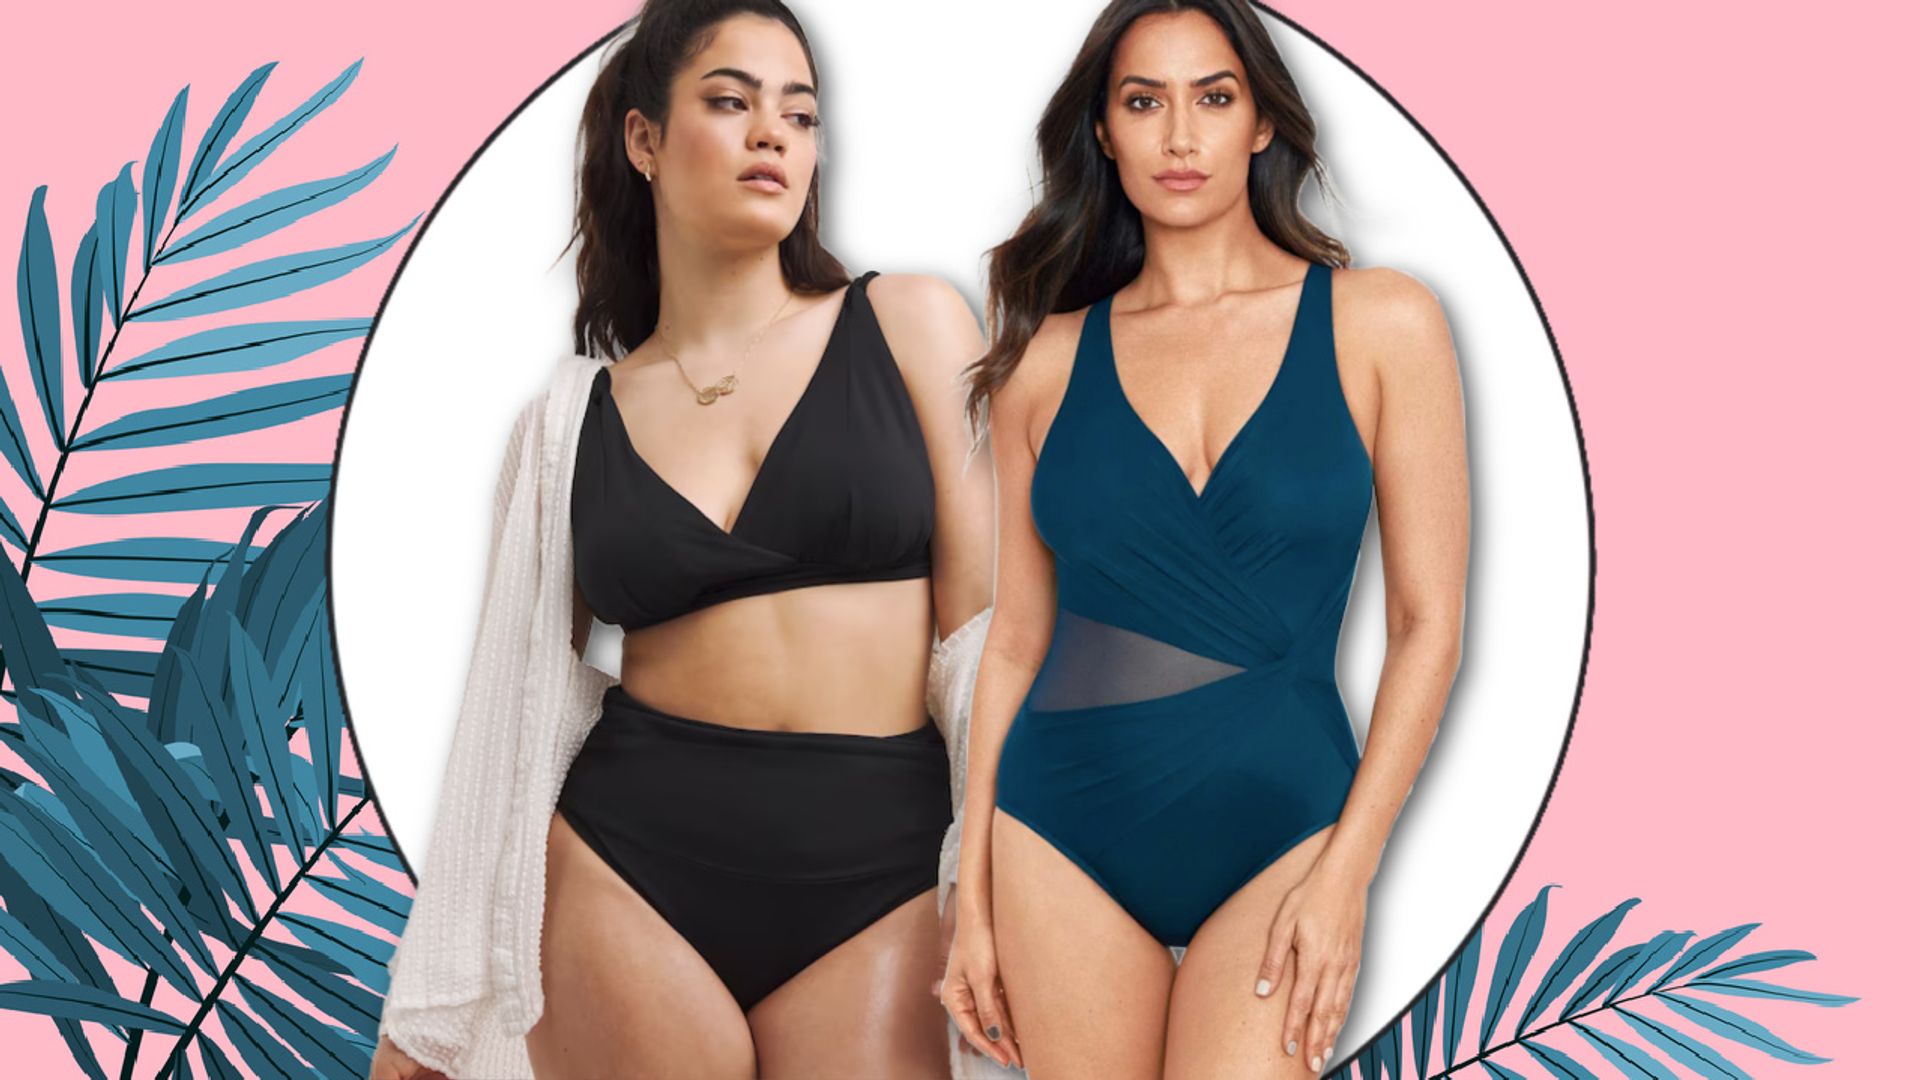 Tummy Control Swimsuits